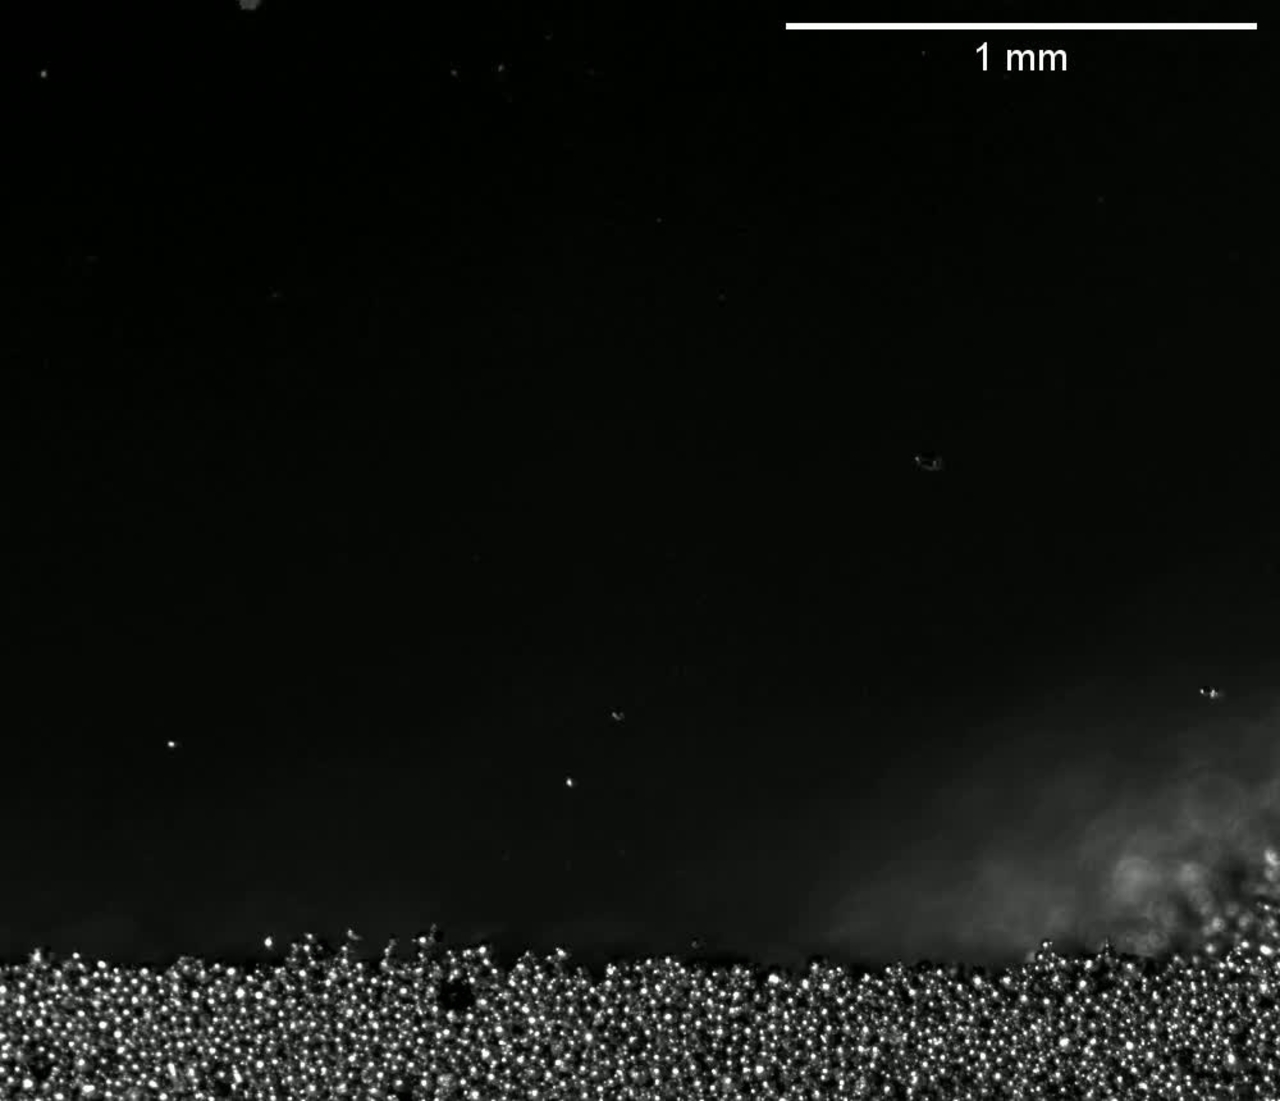 High-speed video of metal powder spreading using the powder spreading testbed (PST) at NIST